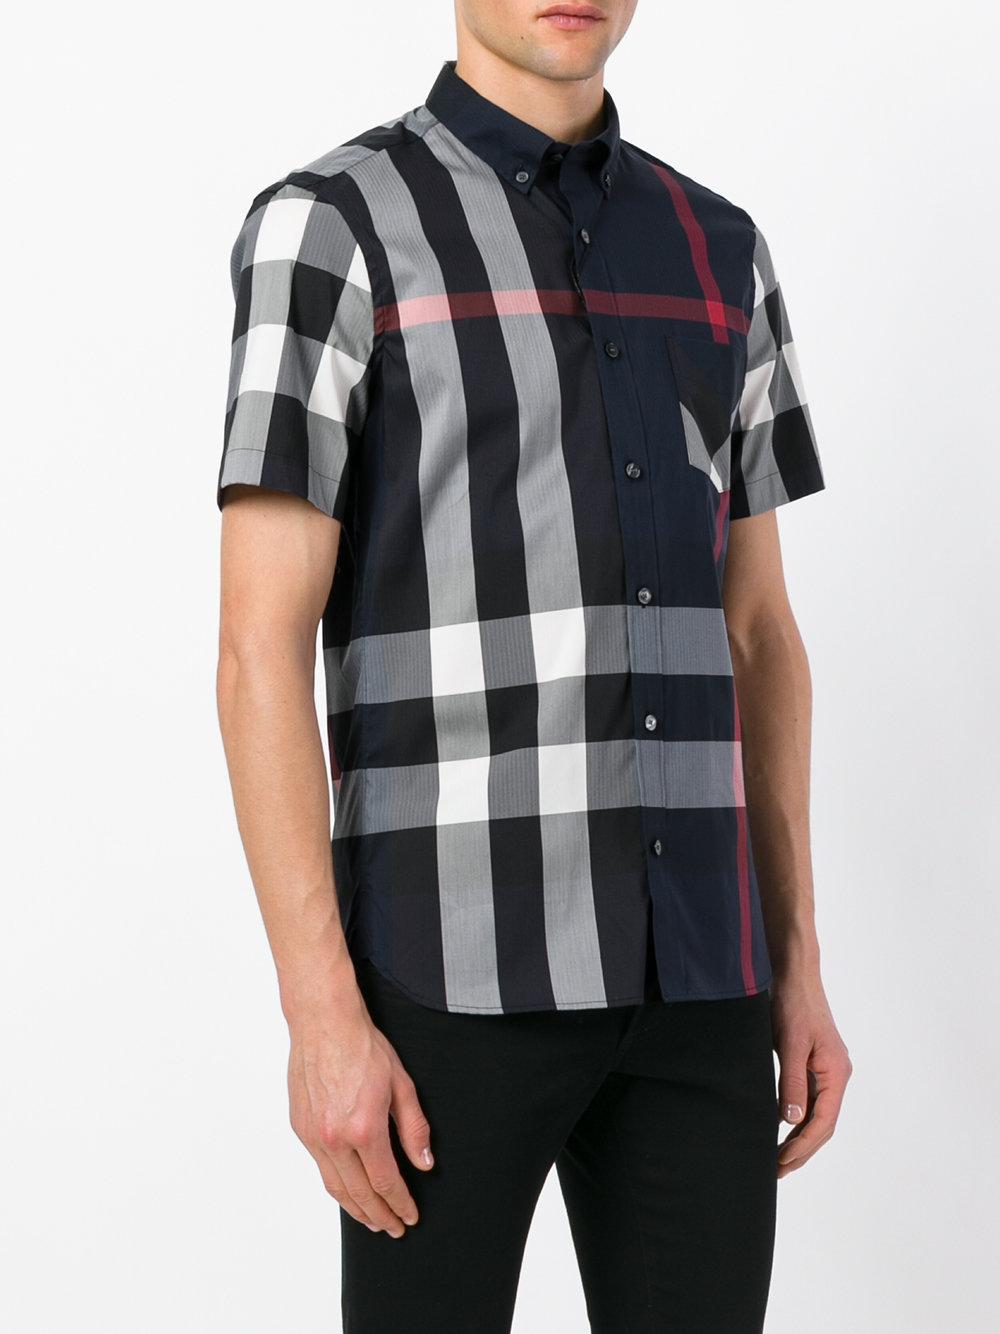 Burberry Cotton Check Short Sleeve Shirt in Blue for Men - Lyst